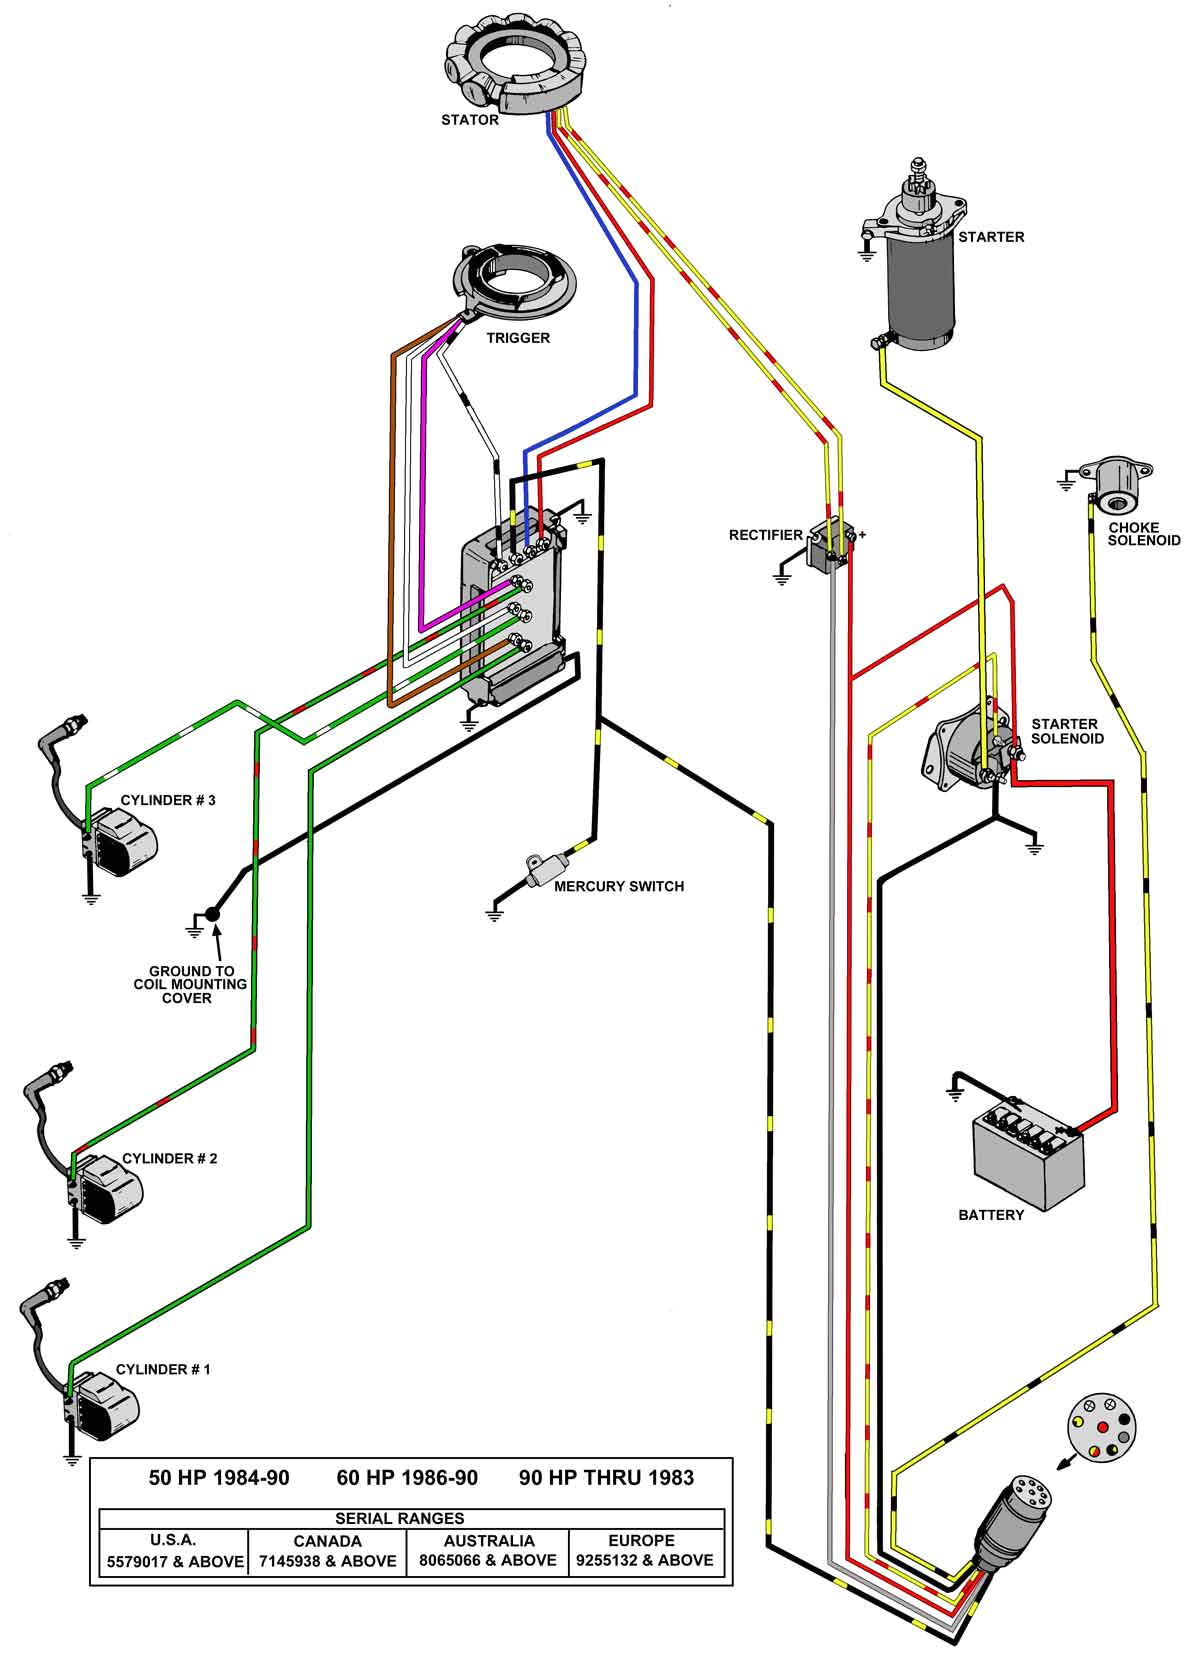 70 hp force wiring diagram wiring diagram expert mercury force 70 hp wiring diagram 70 hp force wiring diagram source 1996 force outboard